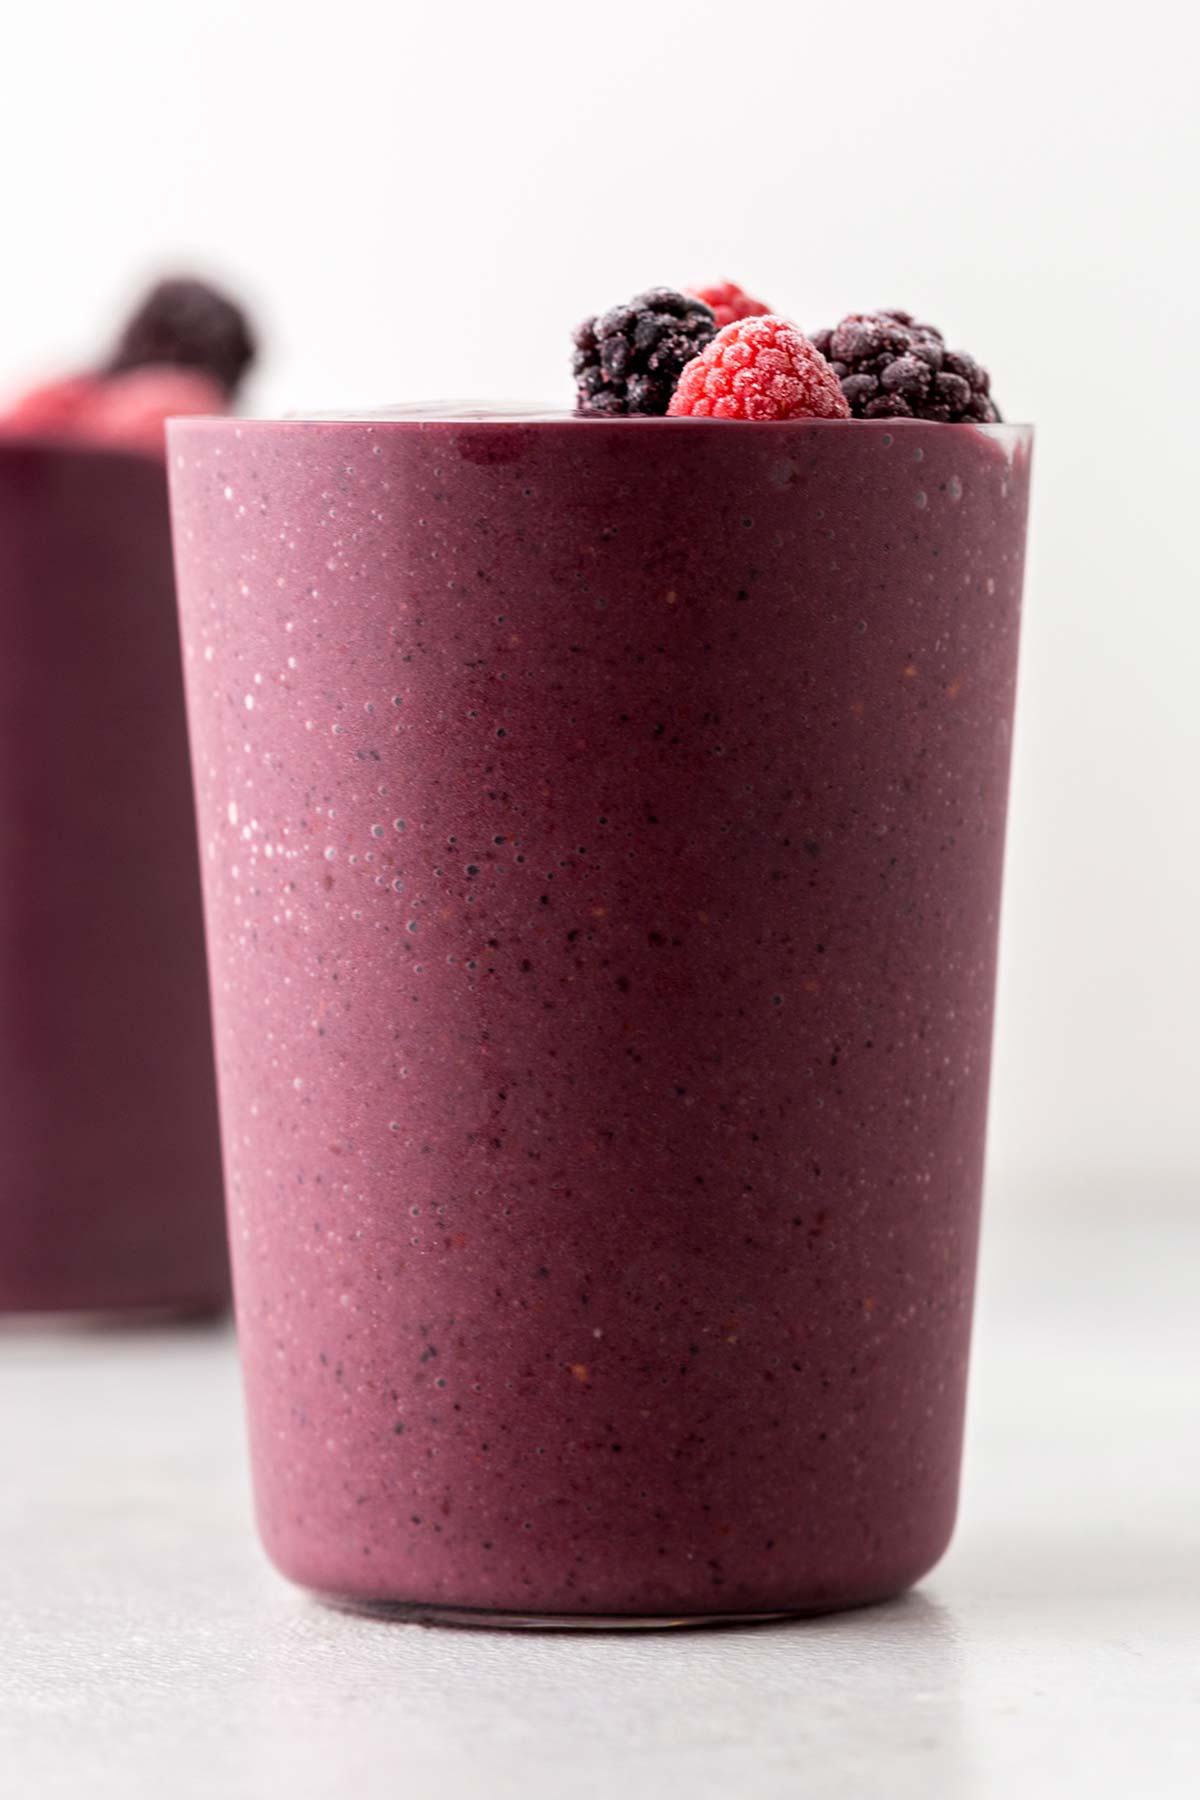 Acai smoothie in a glass.